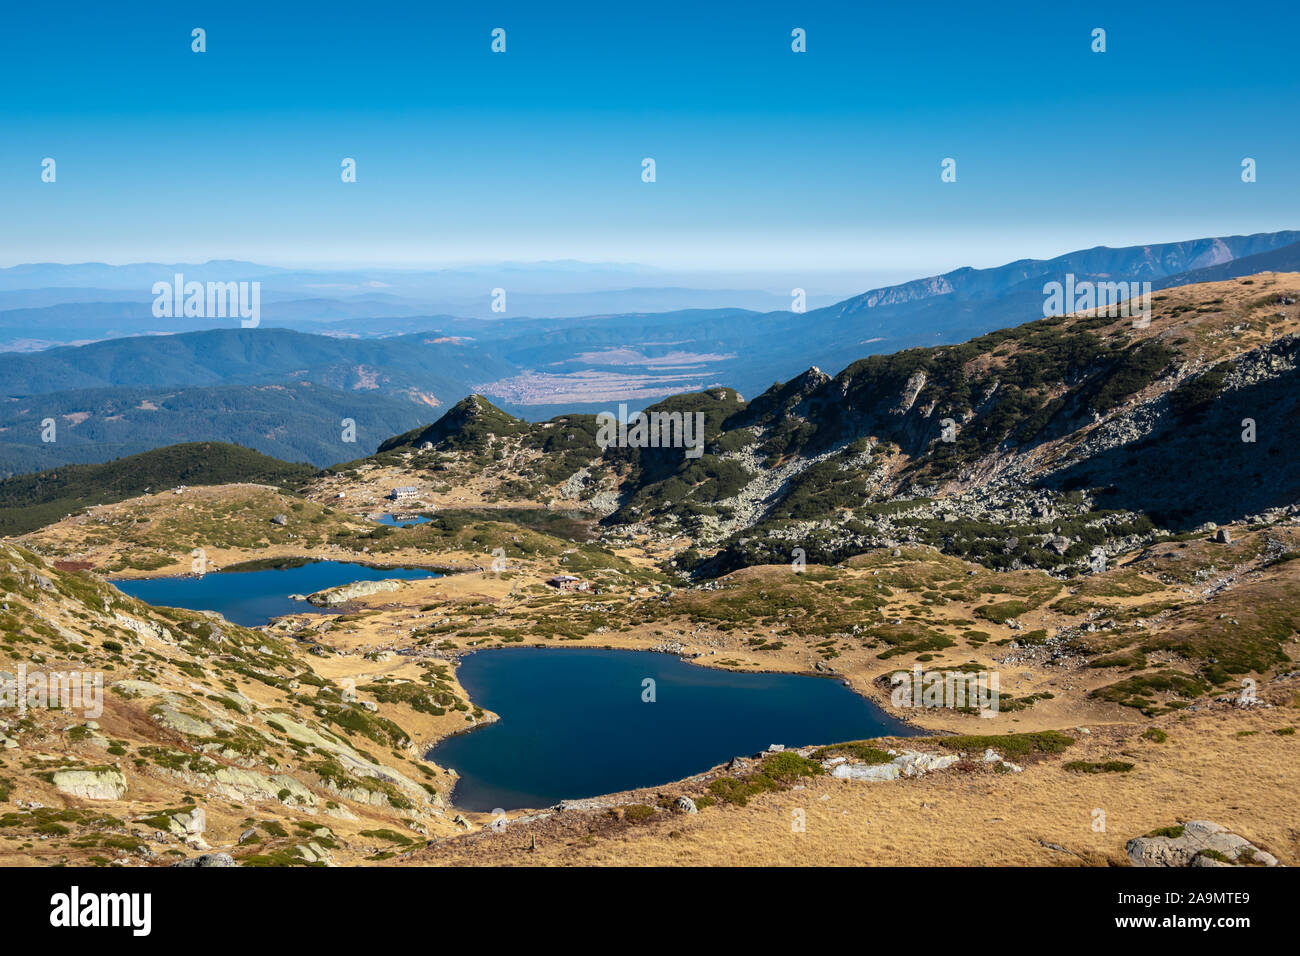 View of the mountain circus with blue glacial lakes. The Seven Rila Lakes, one of the most remarkable natural landmarks on the Balkan Peninsula. Stock Photo